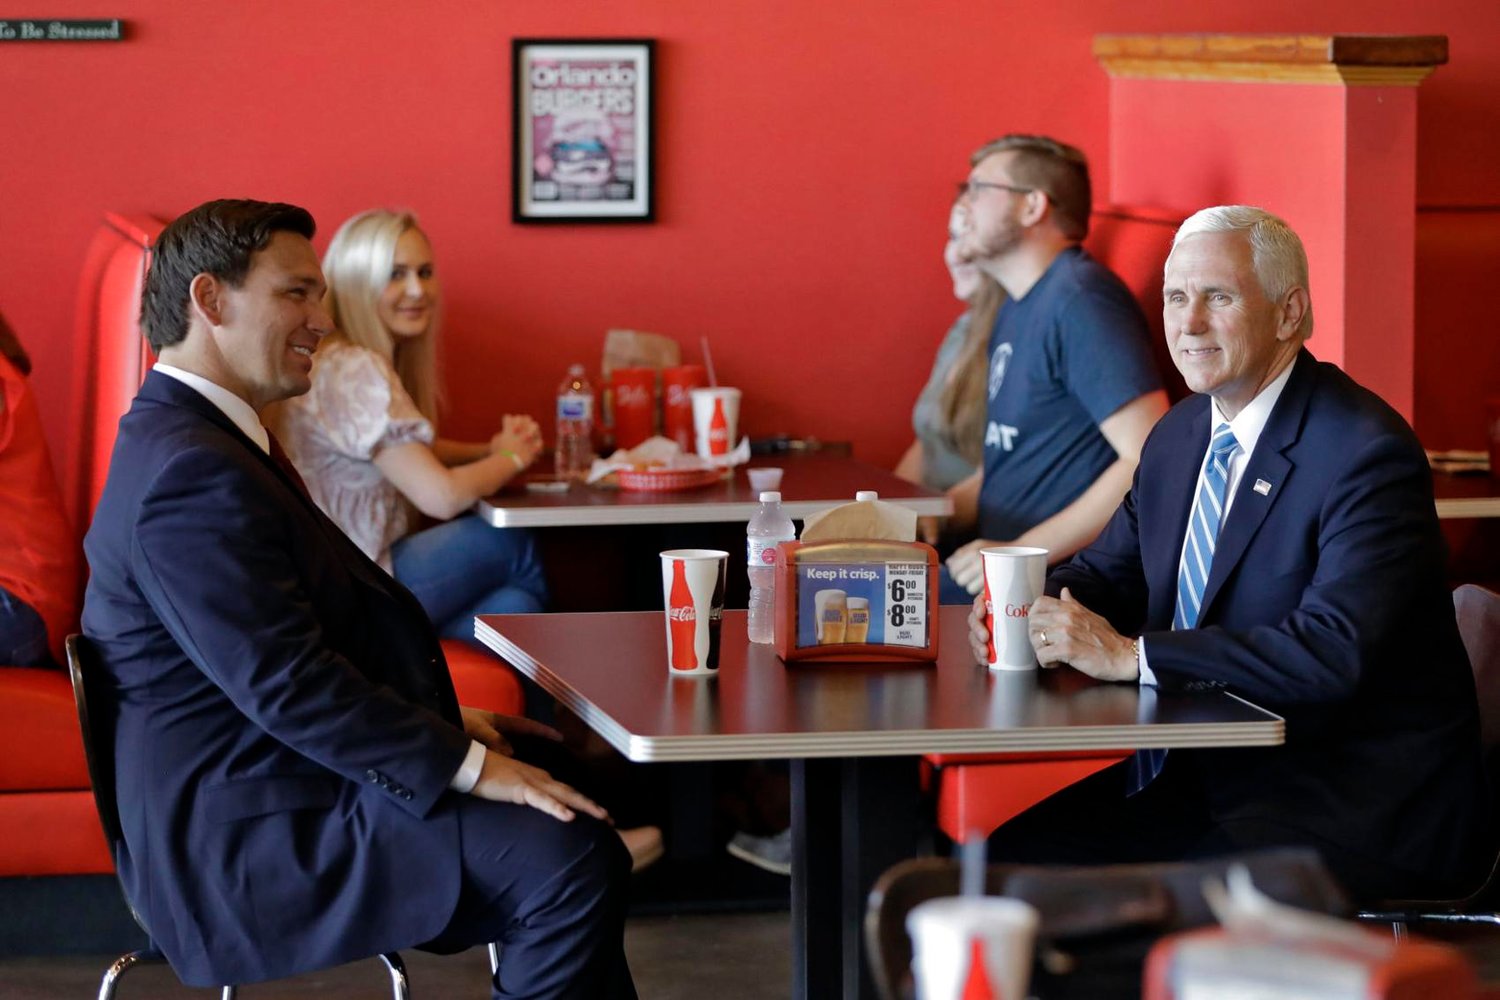 Vice President Mike Pence (right) talks to Florida Gov. Ron DeSantis as they wait for their lunch at Beth's Burger Bar on Wednesday, May 20, 2020, in Orlando, Fla. Chris O'Meara / AP